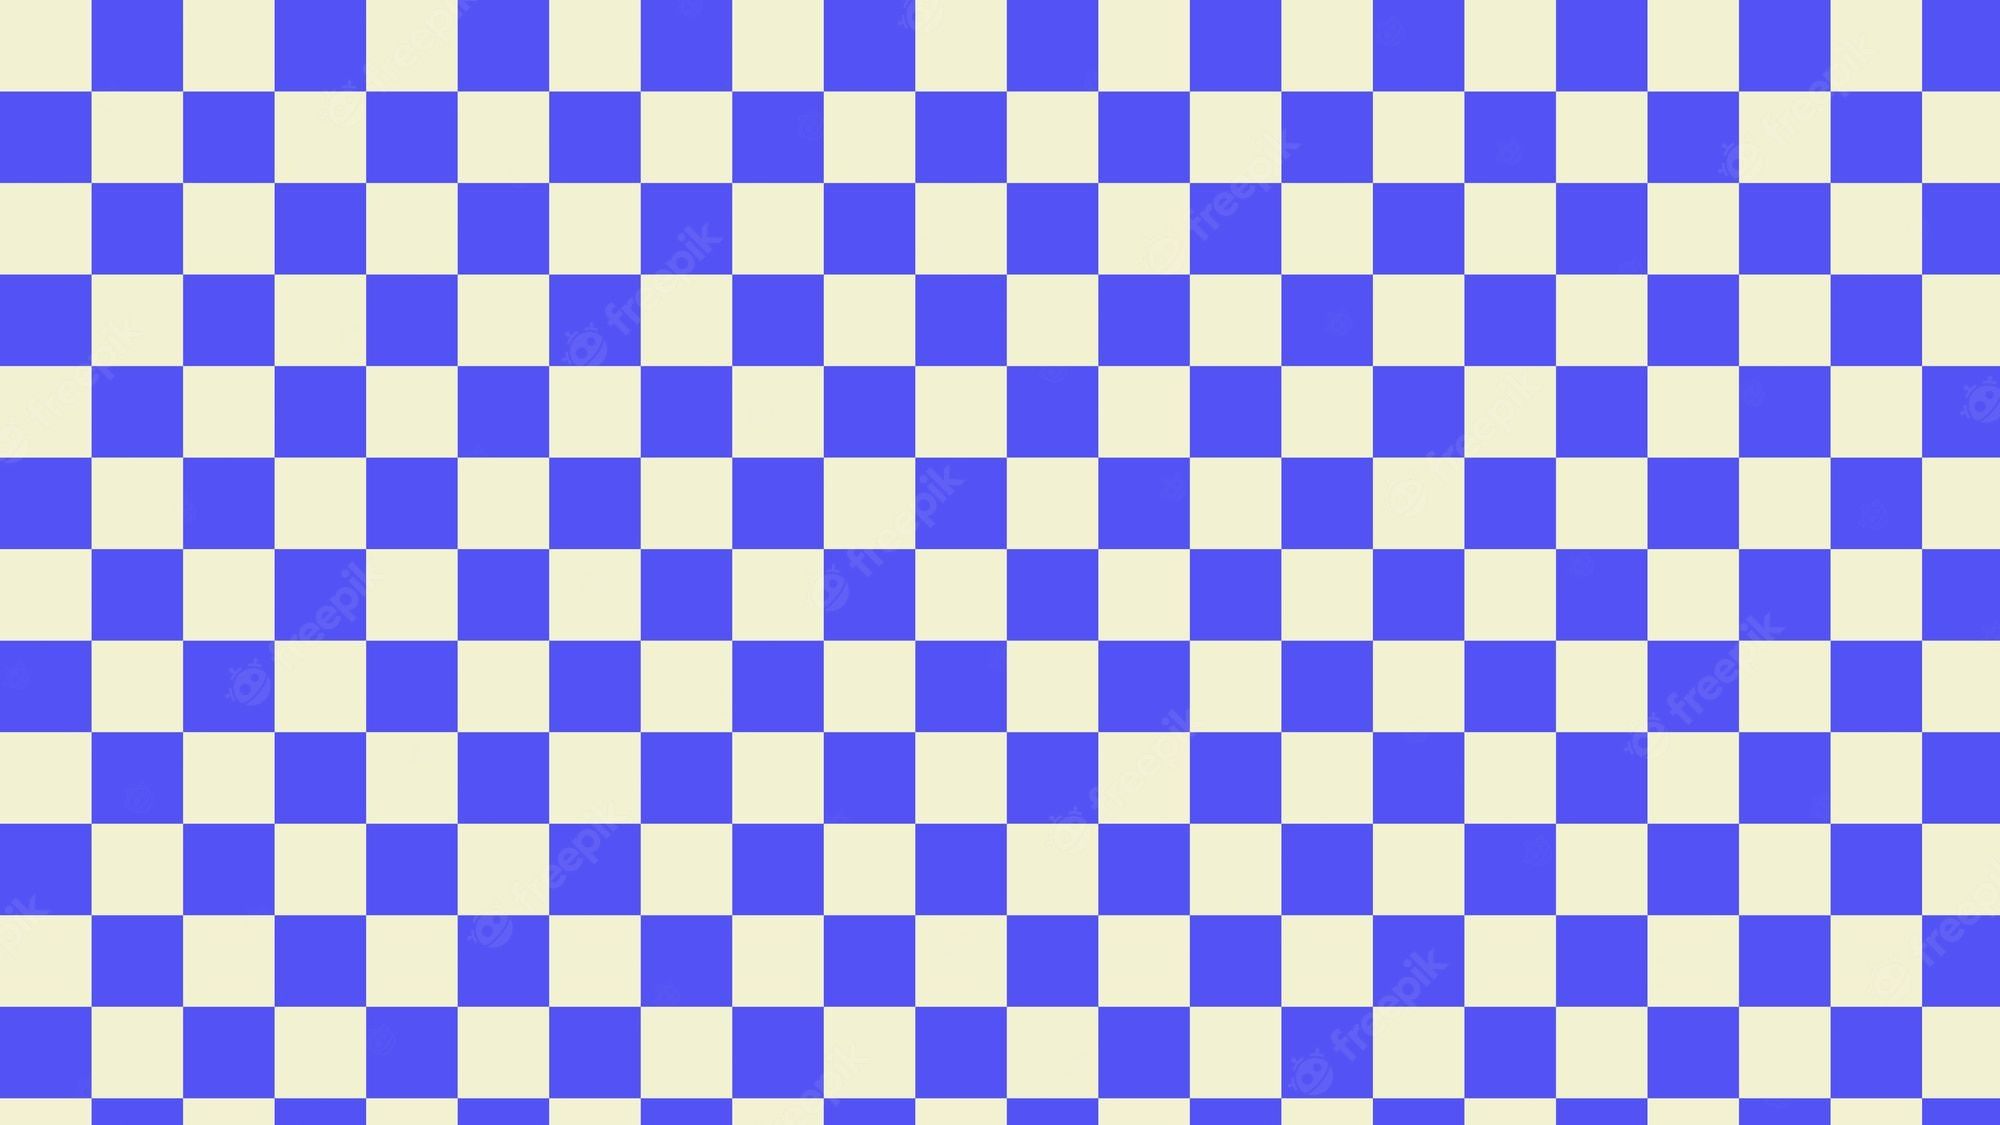 A blue and yellow checkered pattern - Light yellow